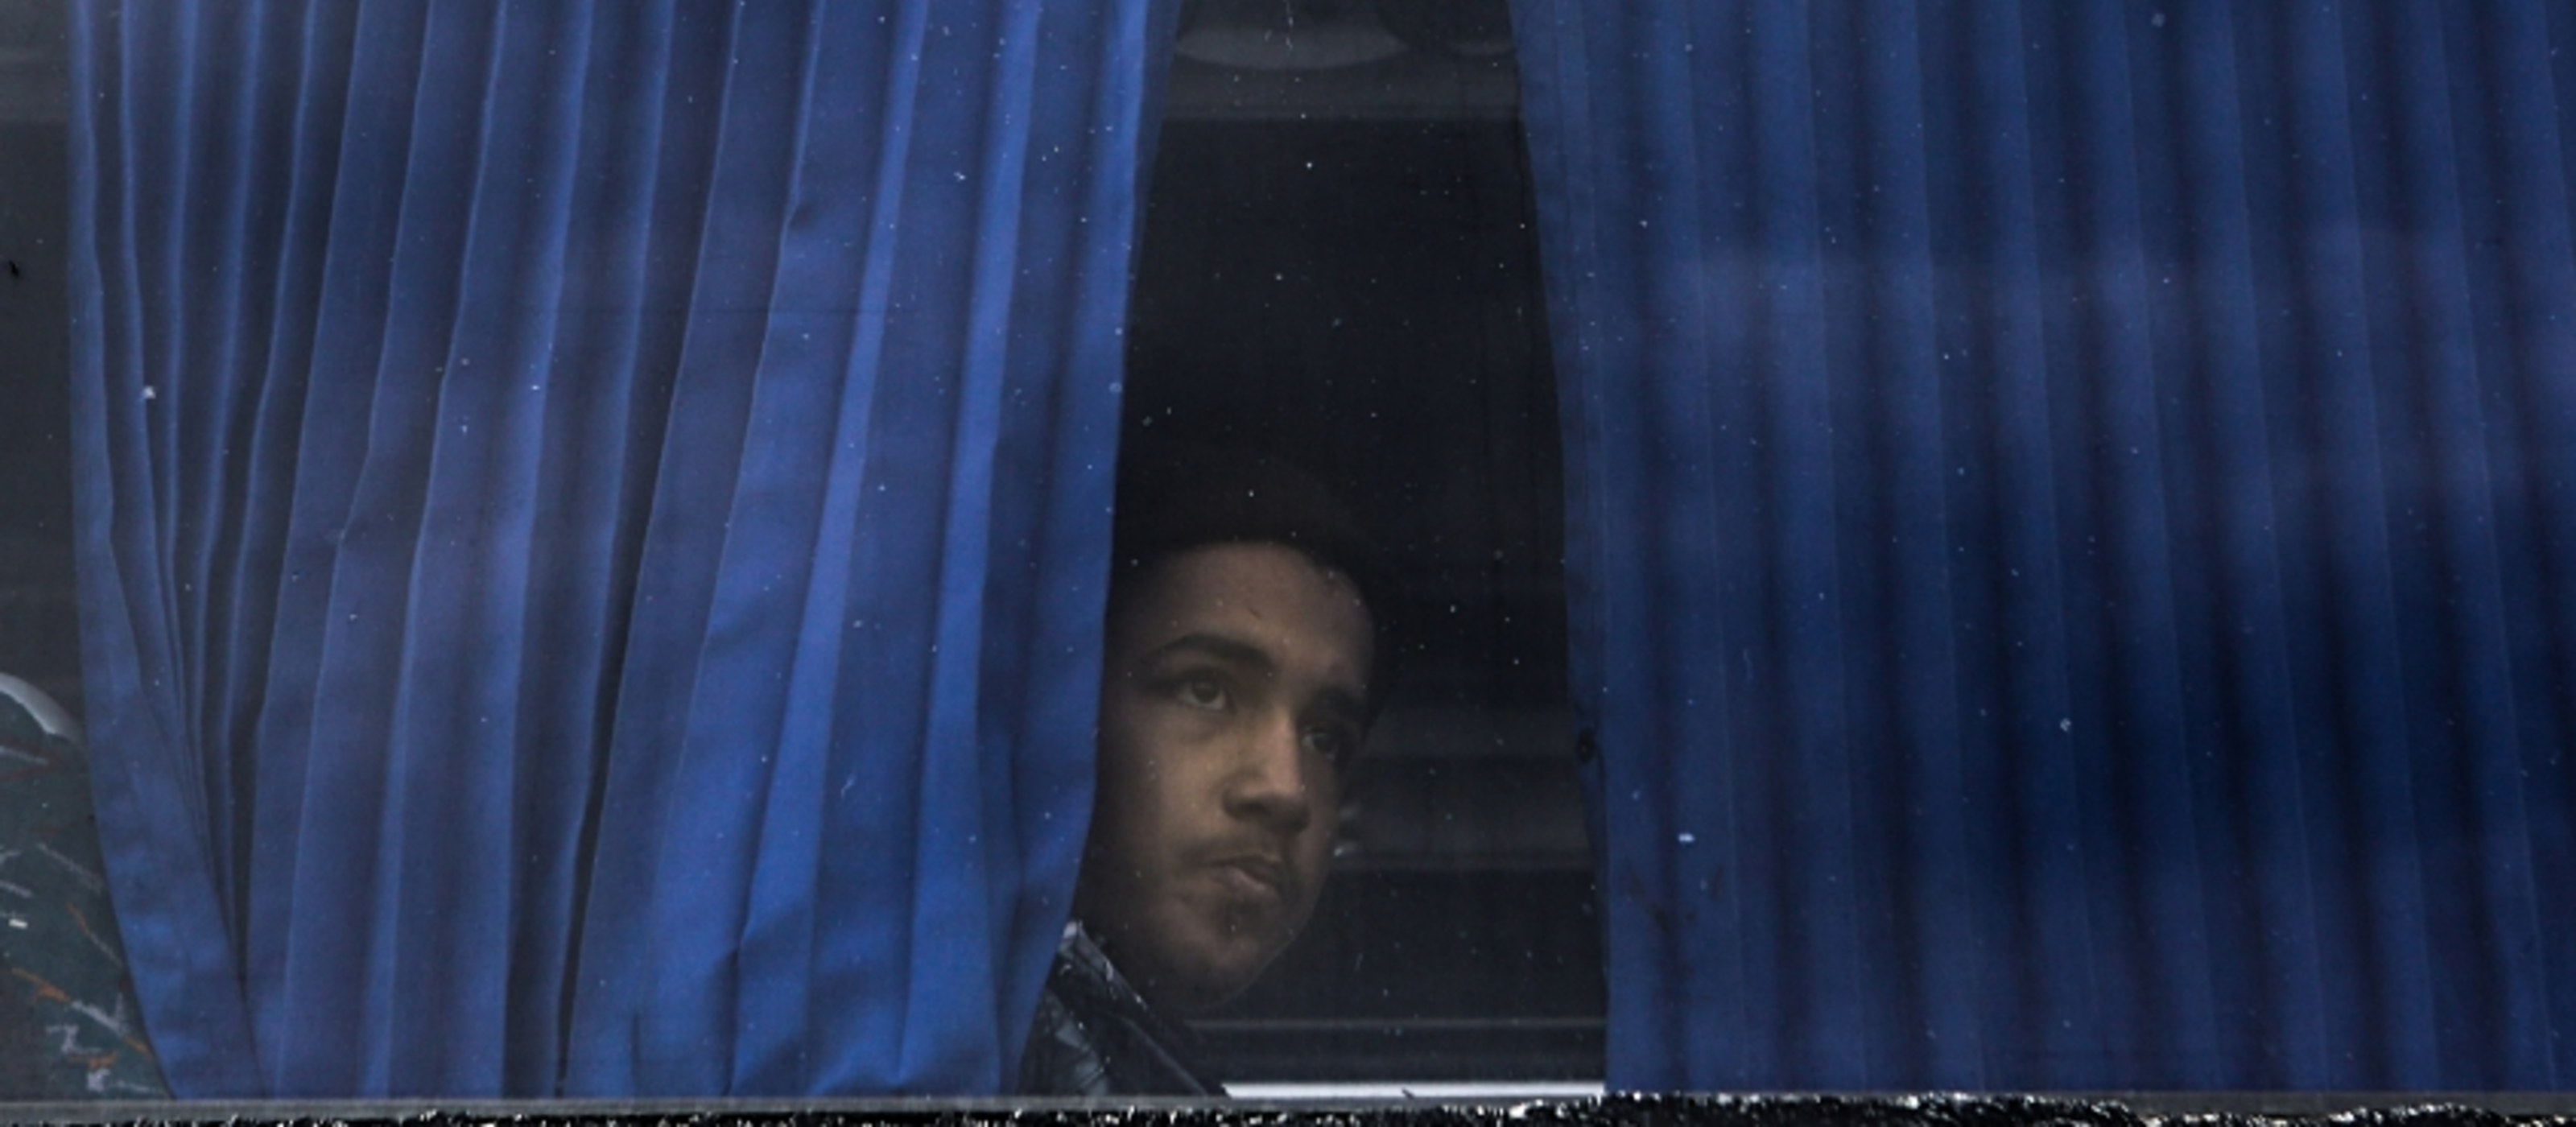 Symbolic image of a migrant on a bus.